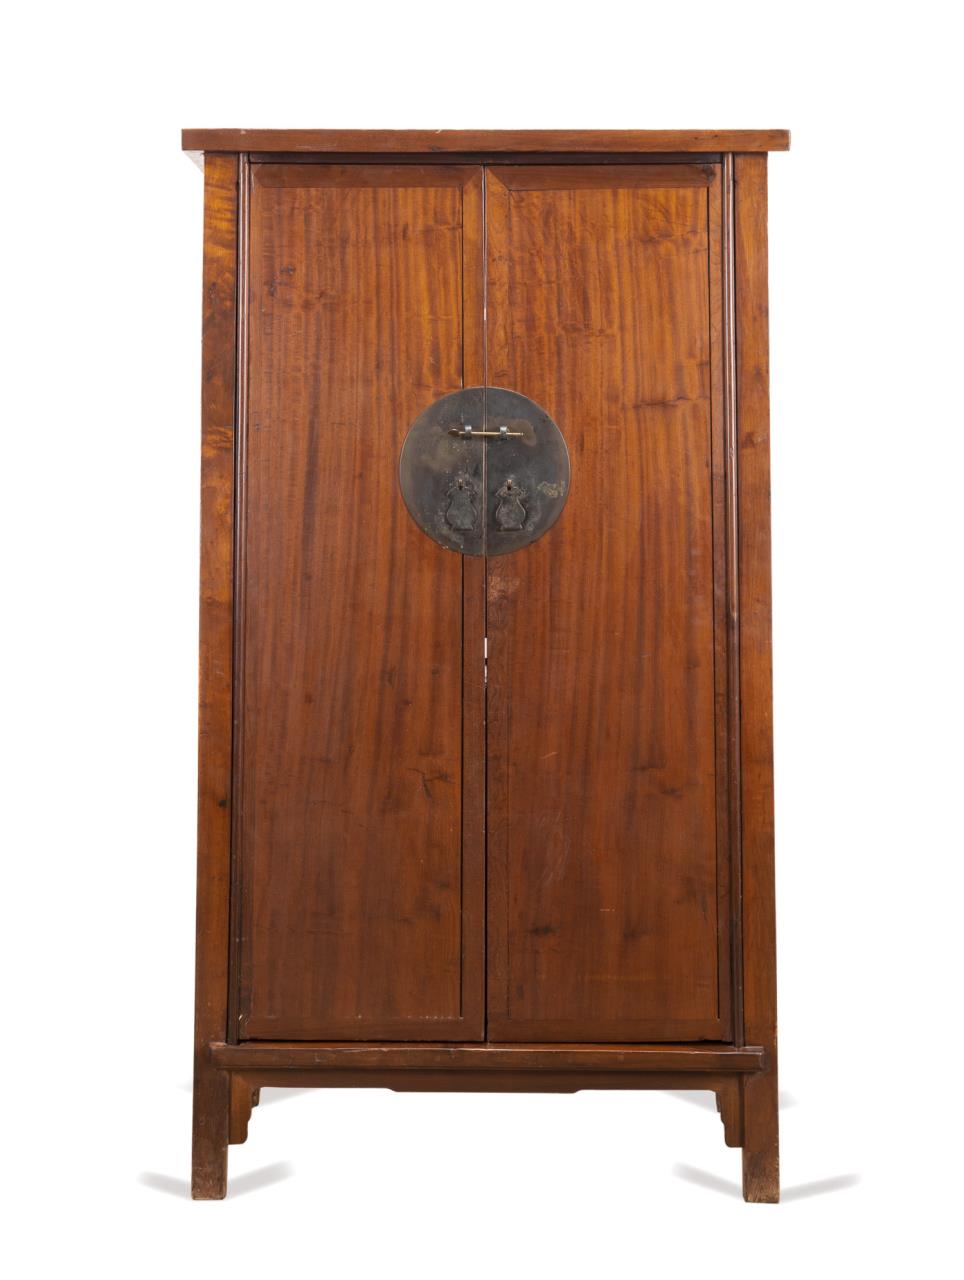 LARGE CHINESE DOUBLE DOOR CABINET